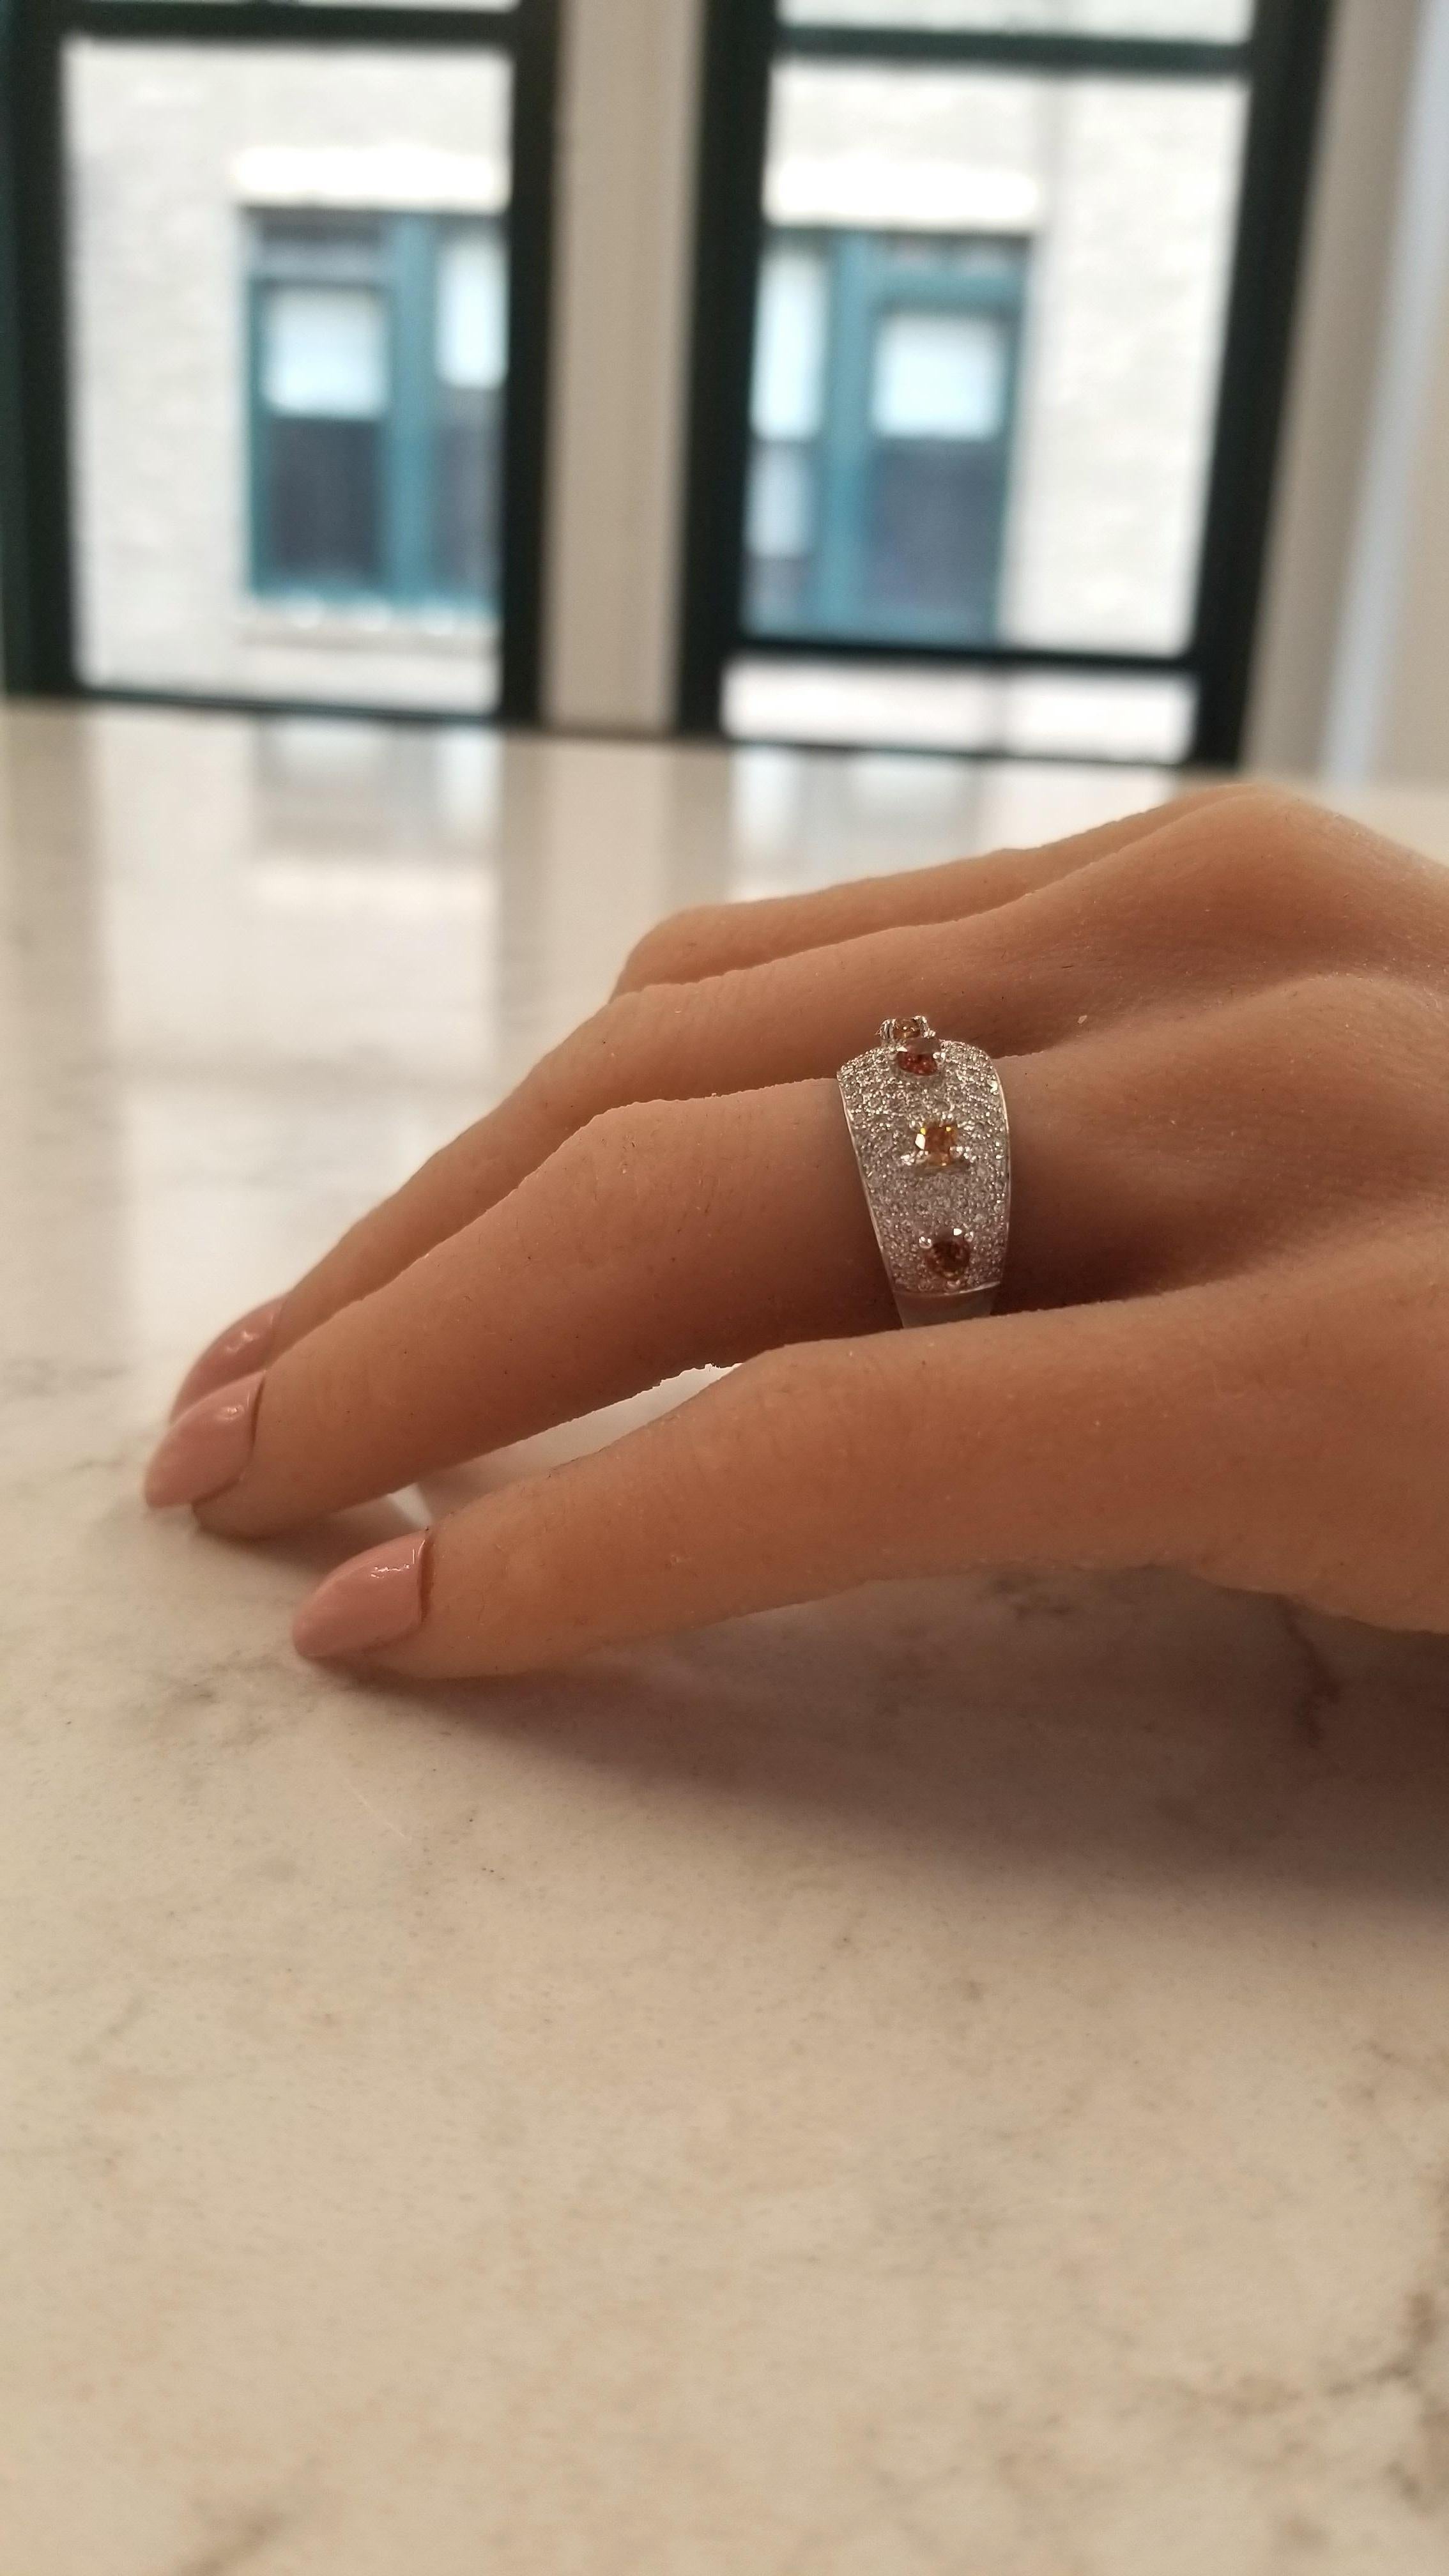 This is a cocktail band featuring 0.69 carats of 6 fine quality natural fancy intense orange-brown diamonds that exhibit the finest cognac colors in the world. Designed for divergence, 1.03 carats of 132 scintillating round brilliant cut white